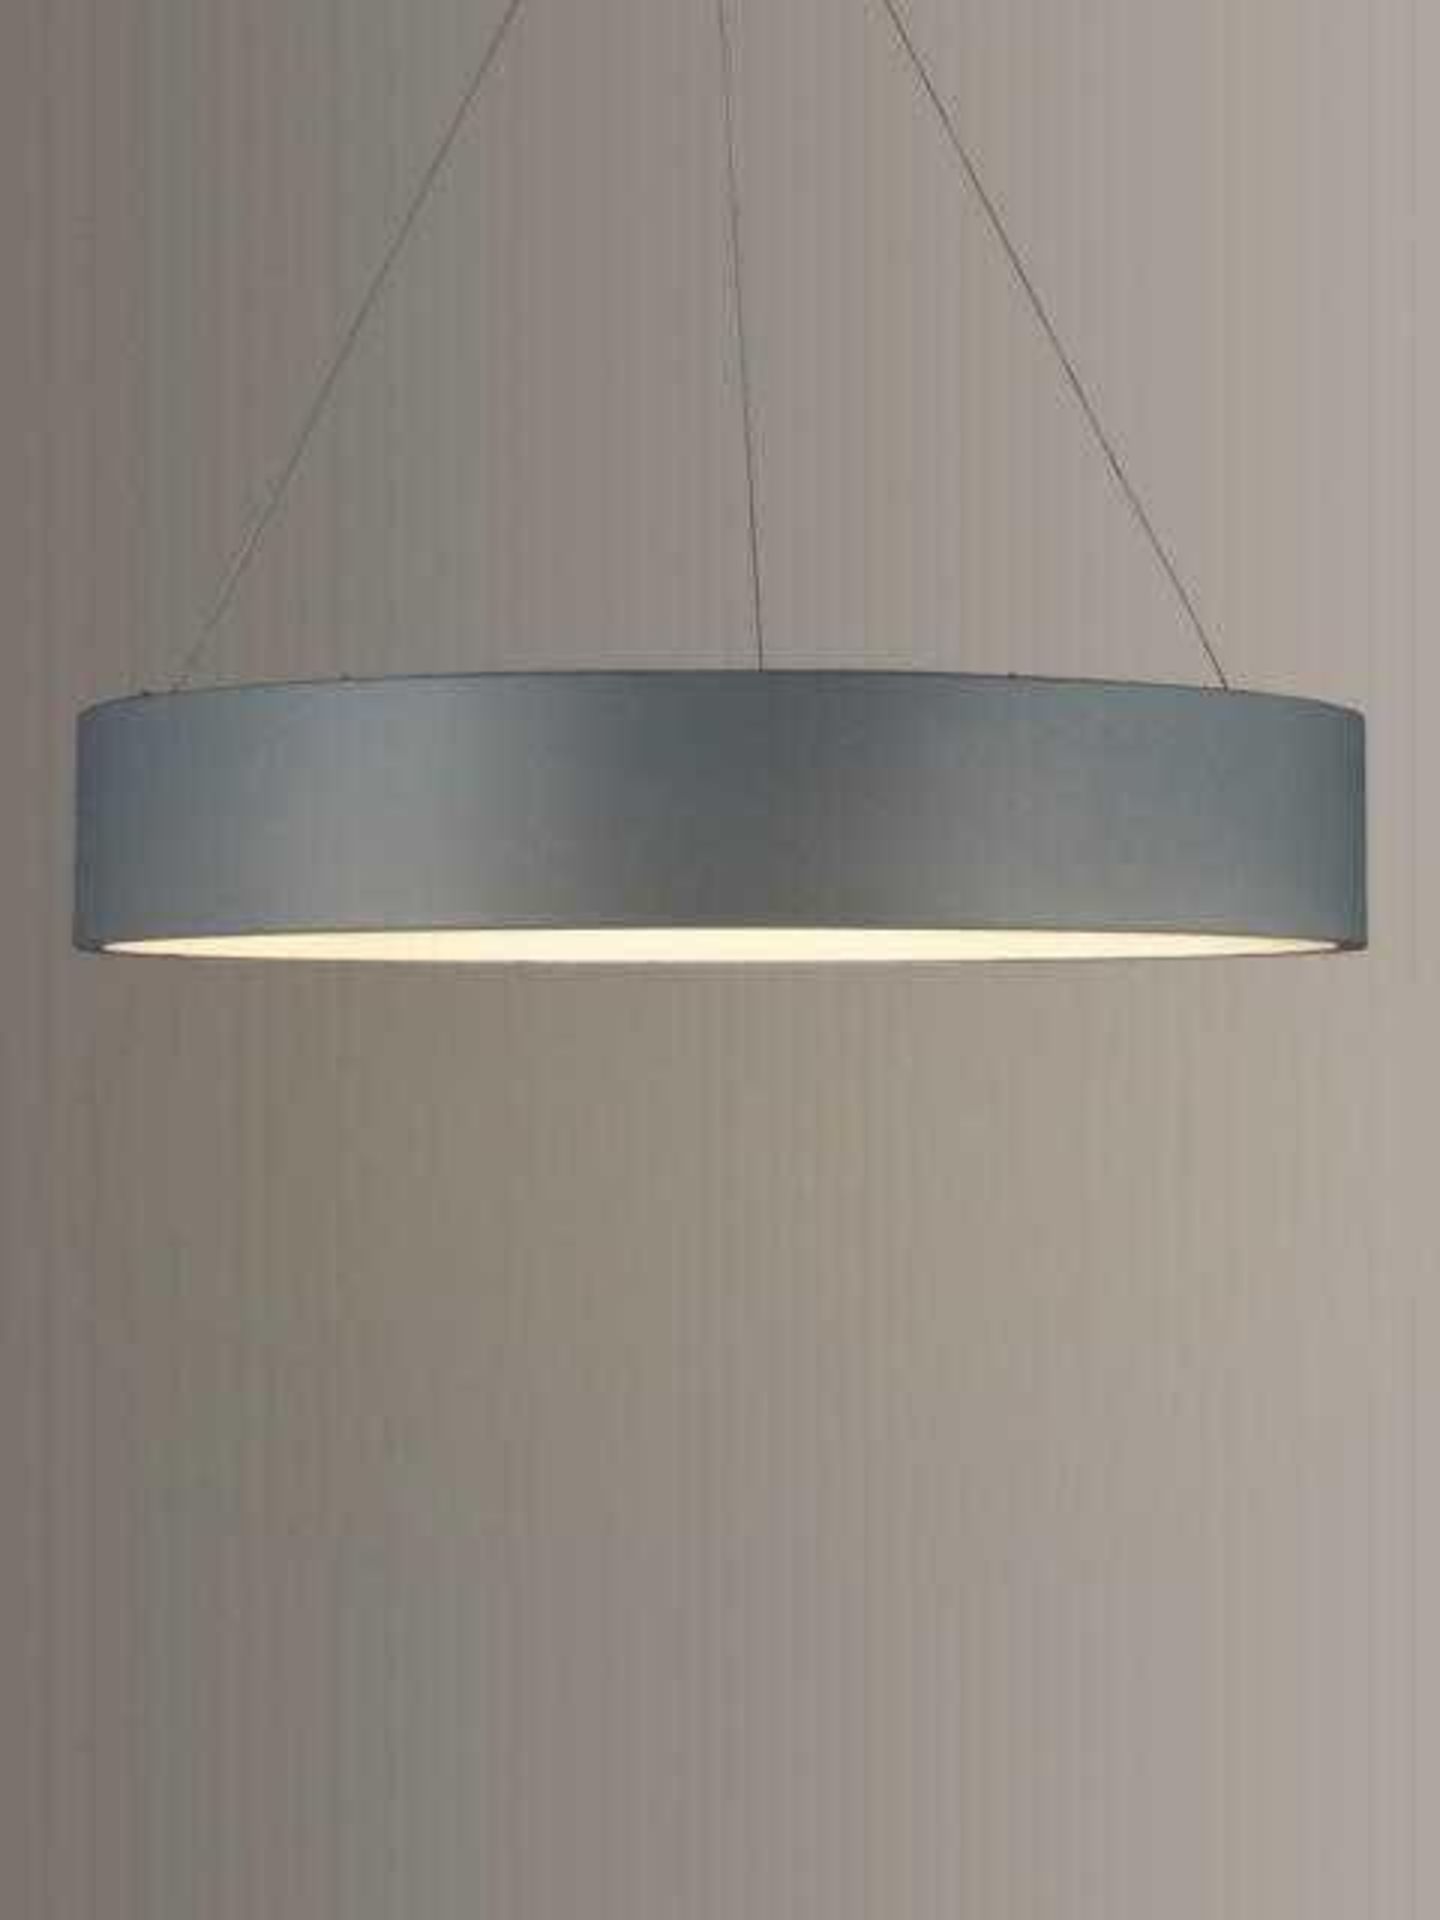 Rrp £325 Boxed John Lewis And Partners Design Project N° 132 Finn Led Ceiling Light - Image 2 of 2